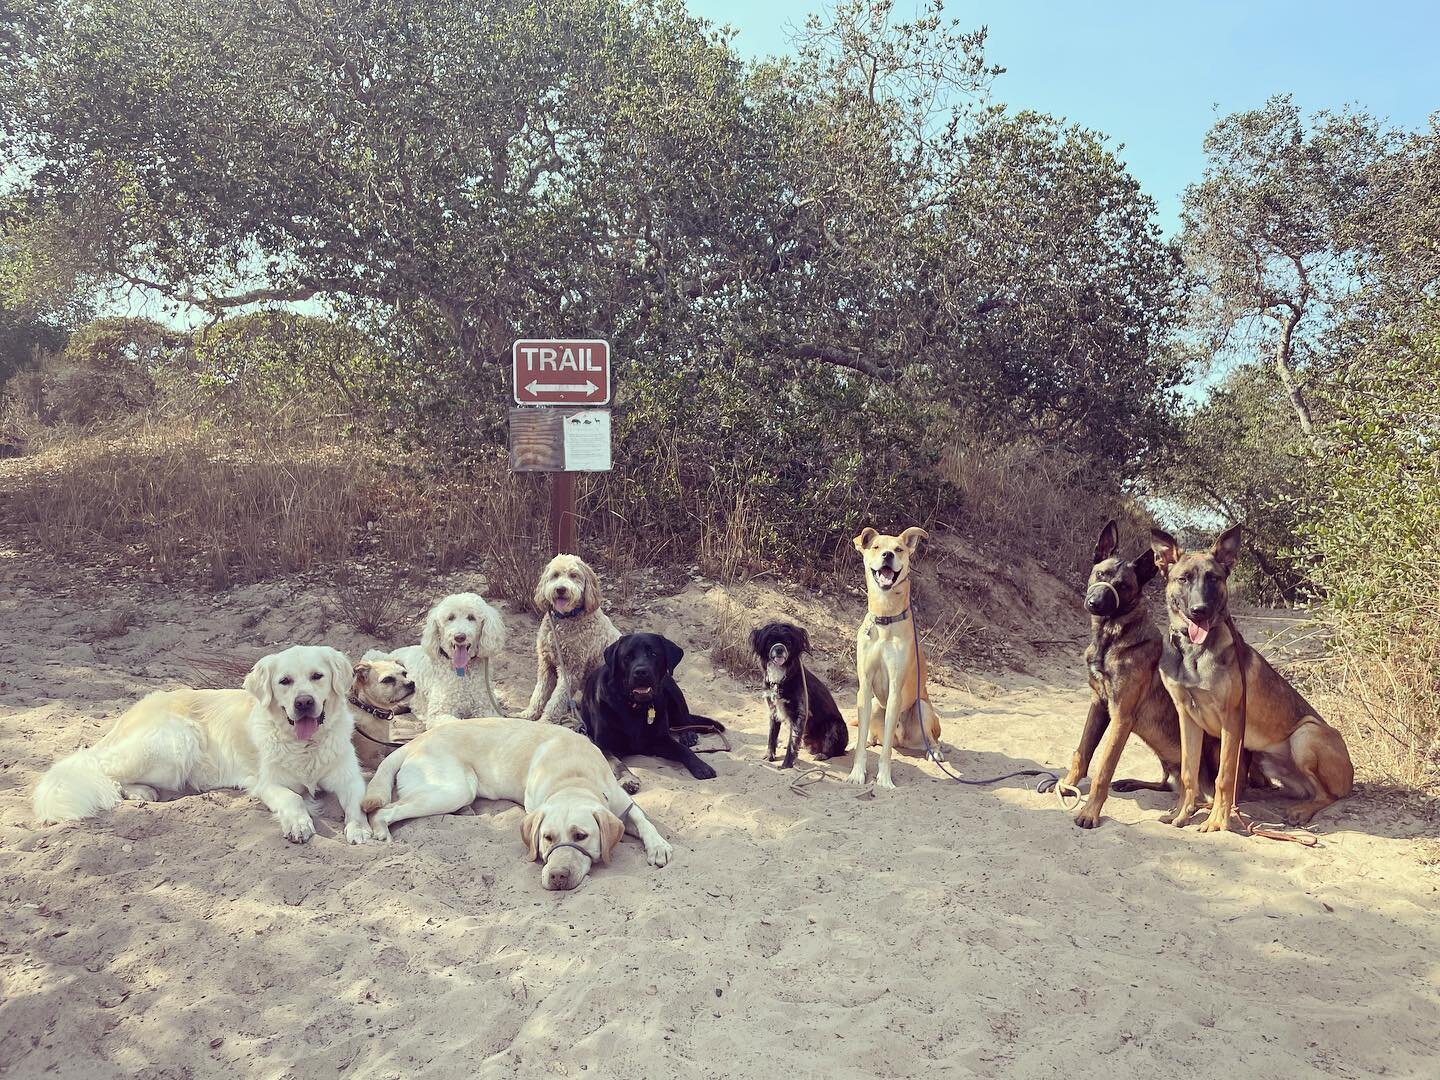 What doggie daycare consist of..

Morning neighborhood walk, quiet time, socialization, play time, nap time, afternoon pack walk, fun activity, quiet time. 

We have lots of resting time throughout the day to make sure the dogs don&rsquo;t end up cra